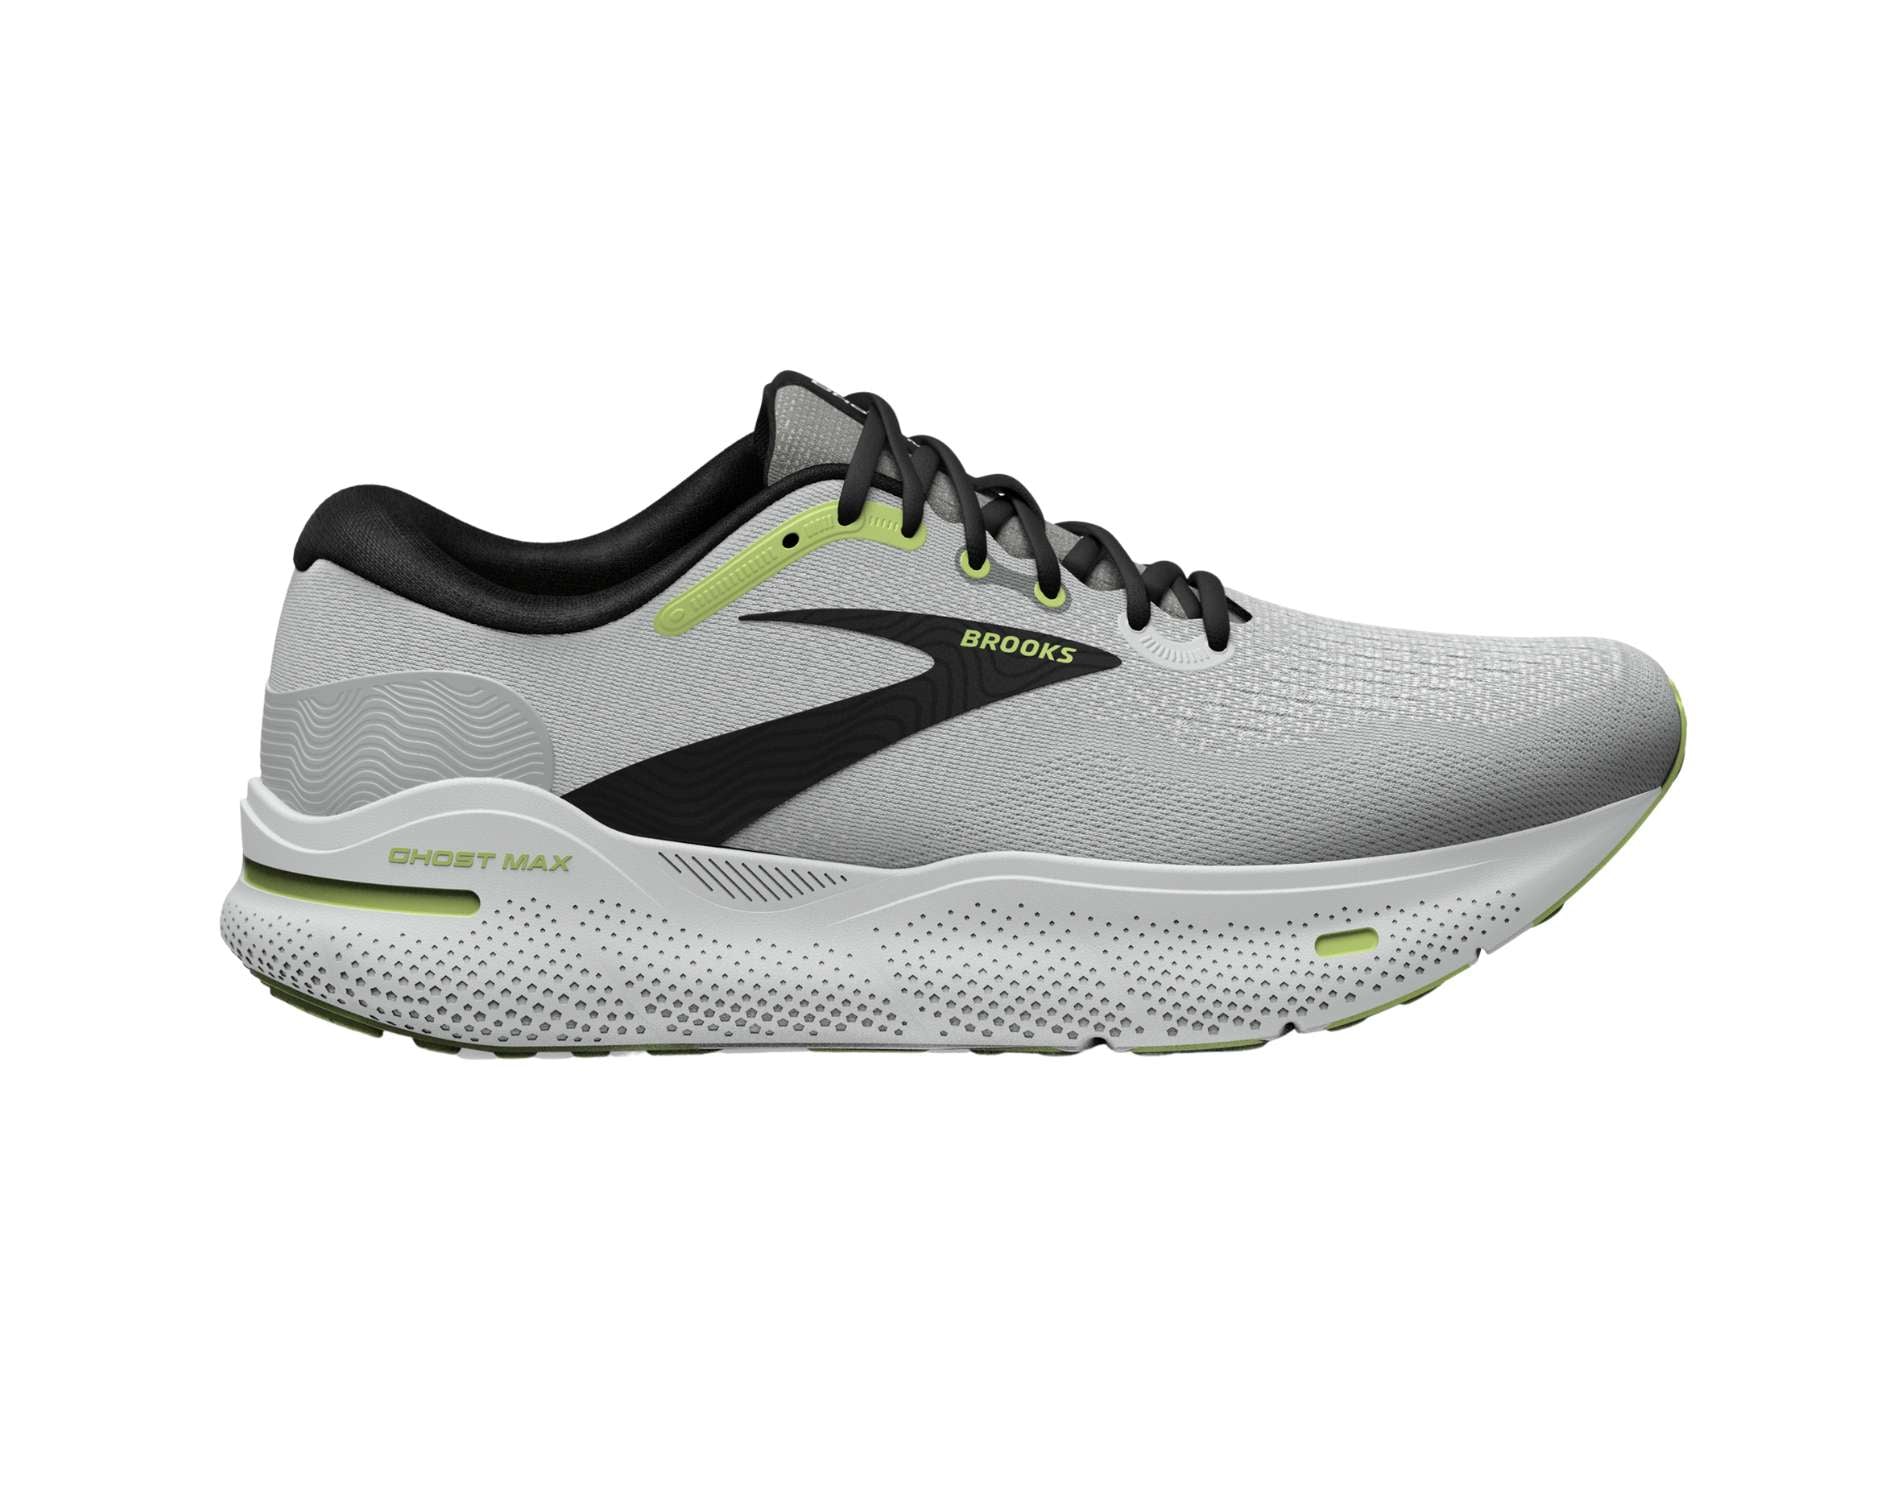 Brooks Ghost Max mens neutral running shoe in d standard with in dawn blue black green colour